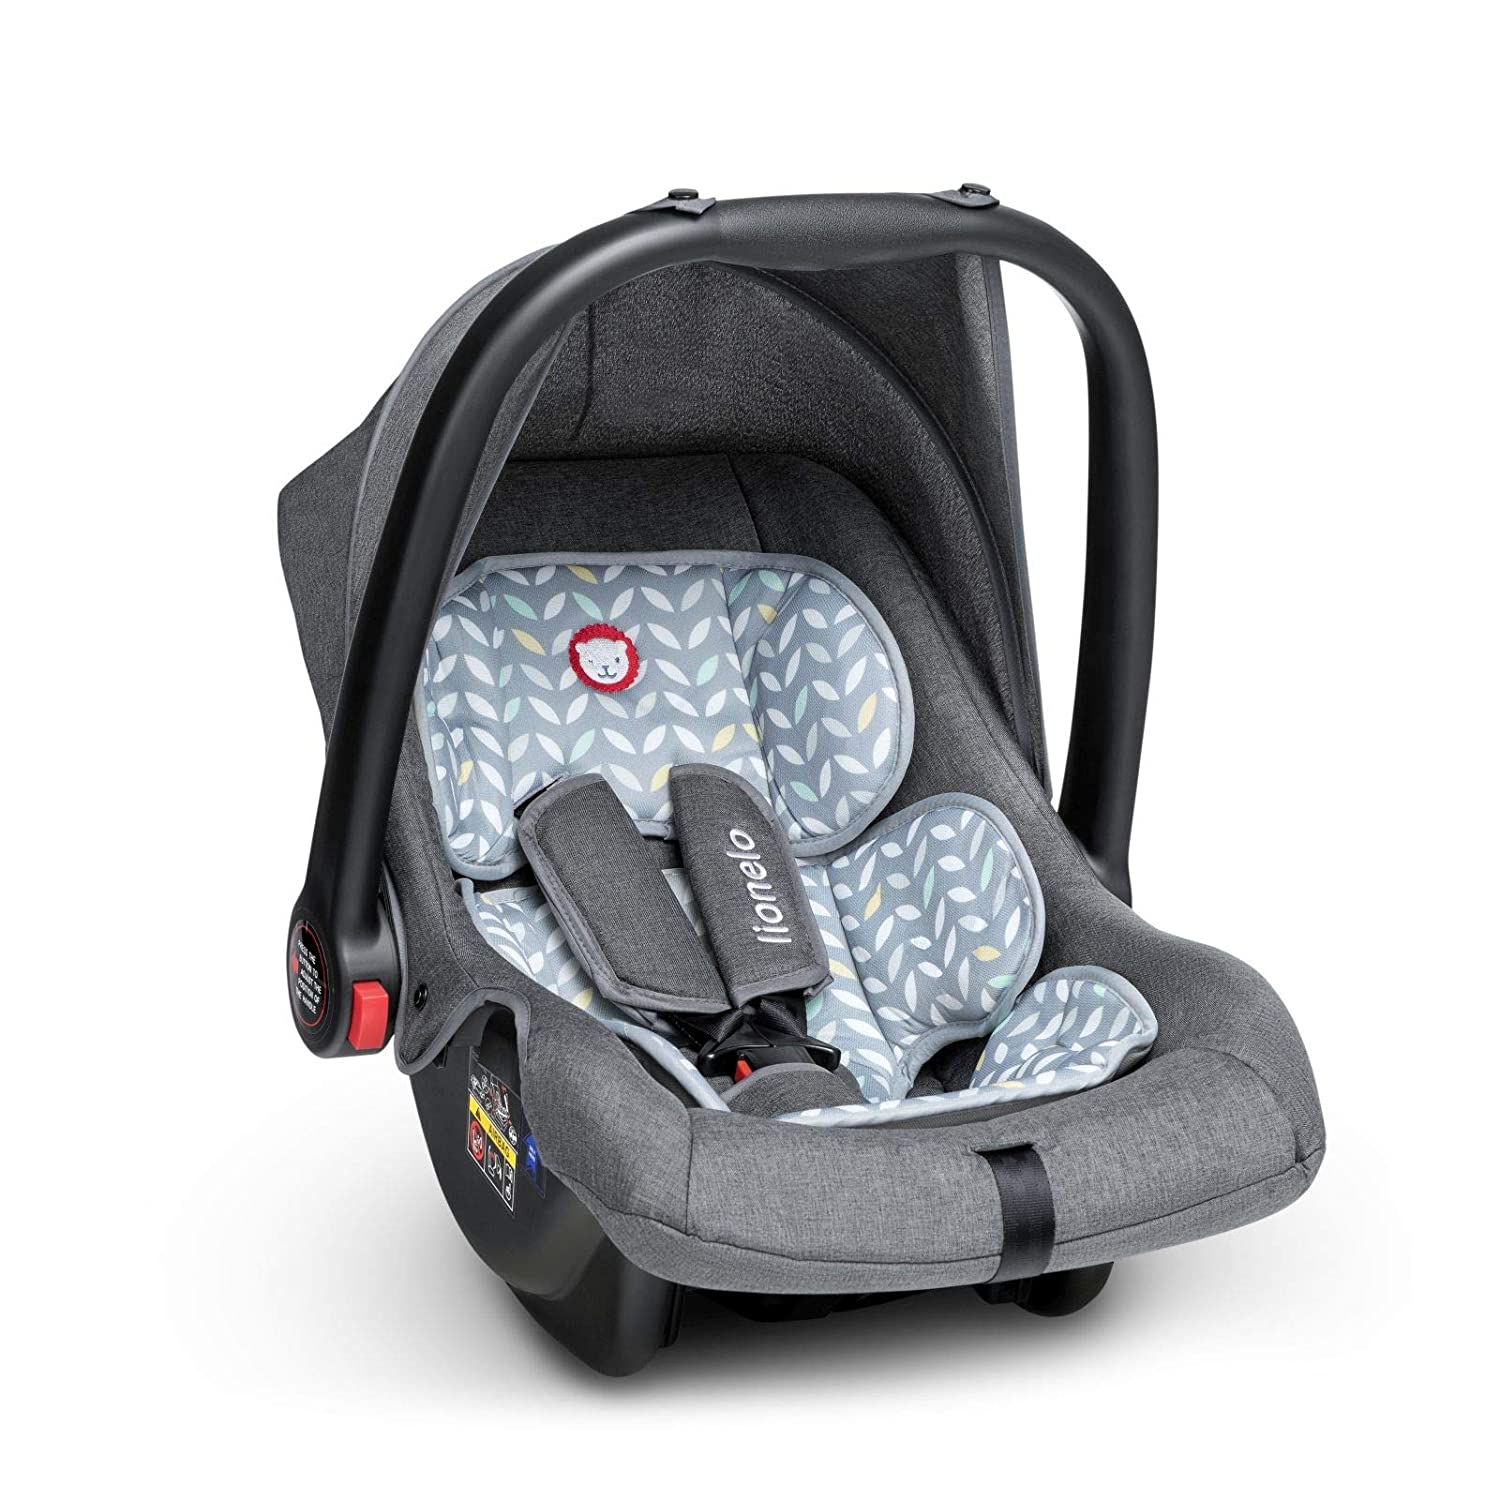 LIONELO Noa Plus Car Seat, Baby Car Seat from Birth to 13 kg, Foot Cover, Sun Canopy, Lightweight Construction, 3-Point Seat Belt, Removable Cushion Cover